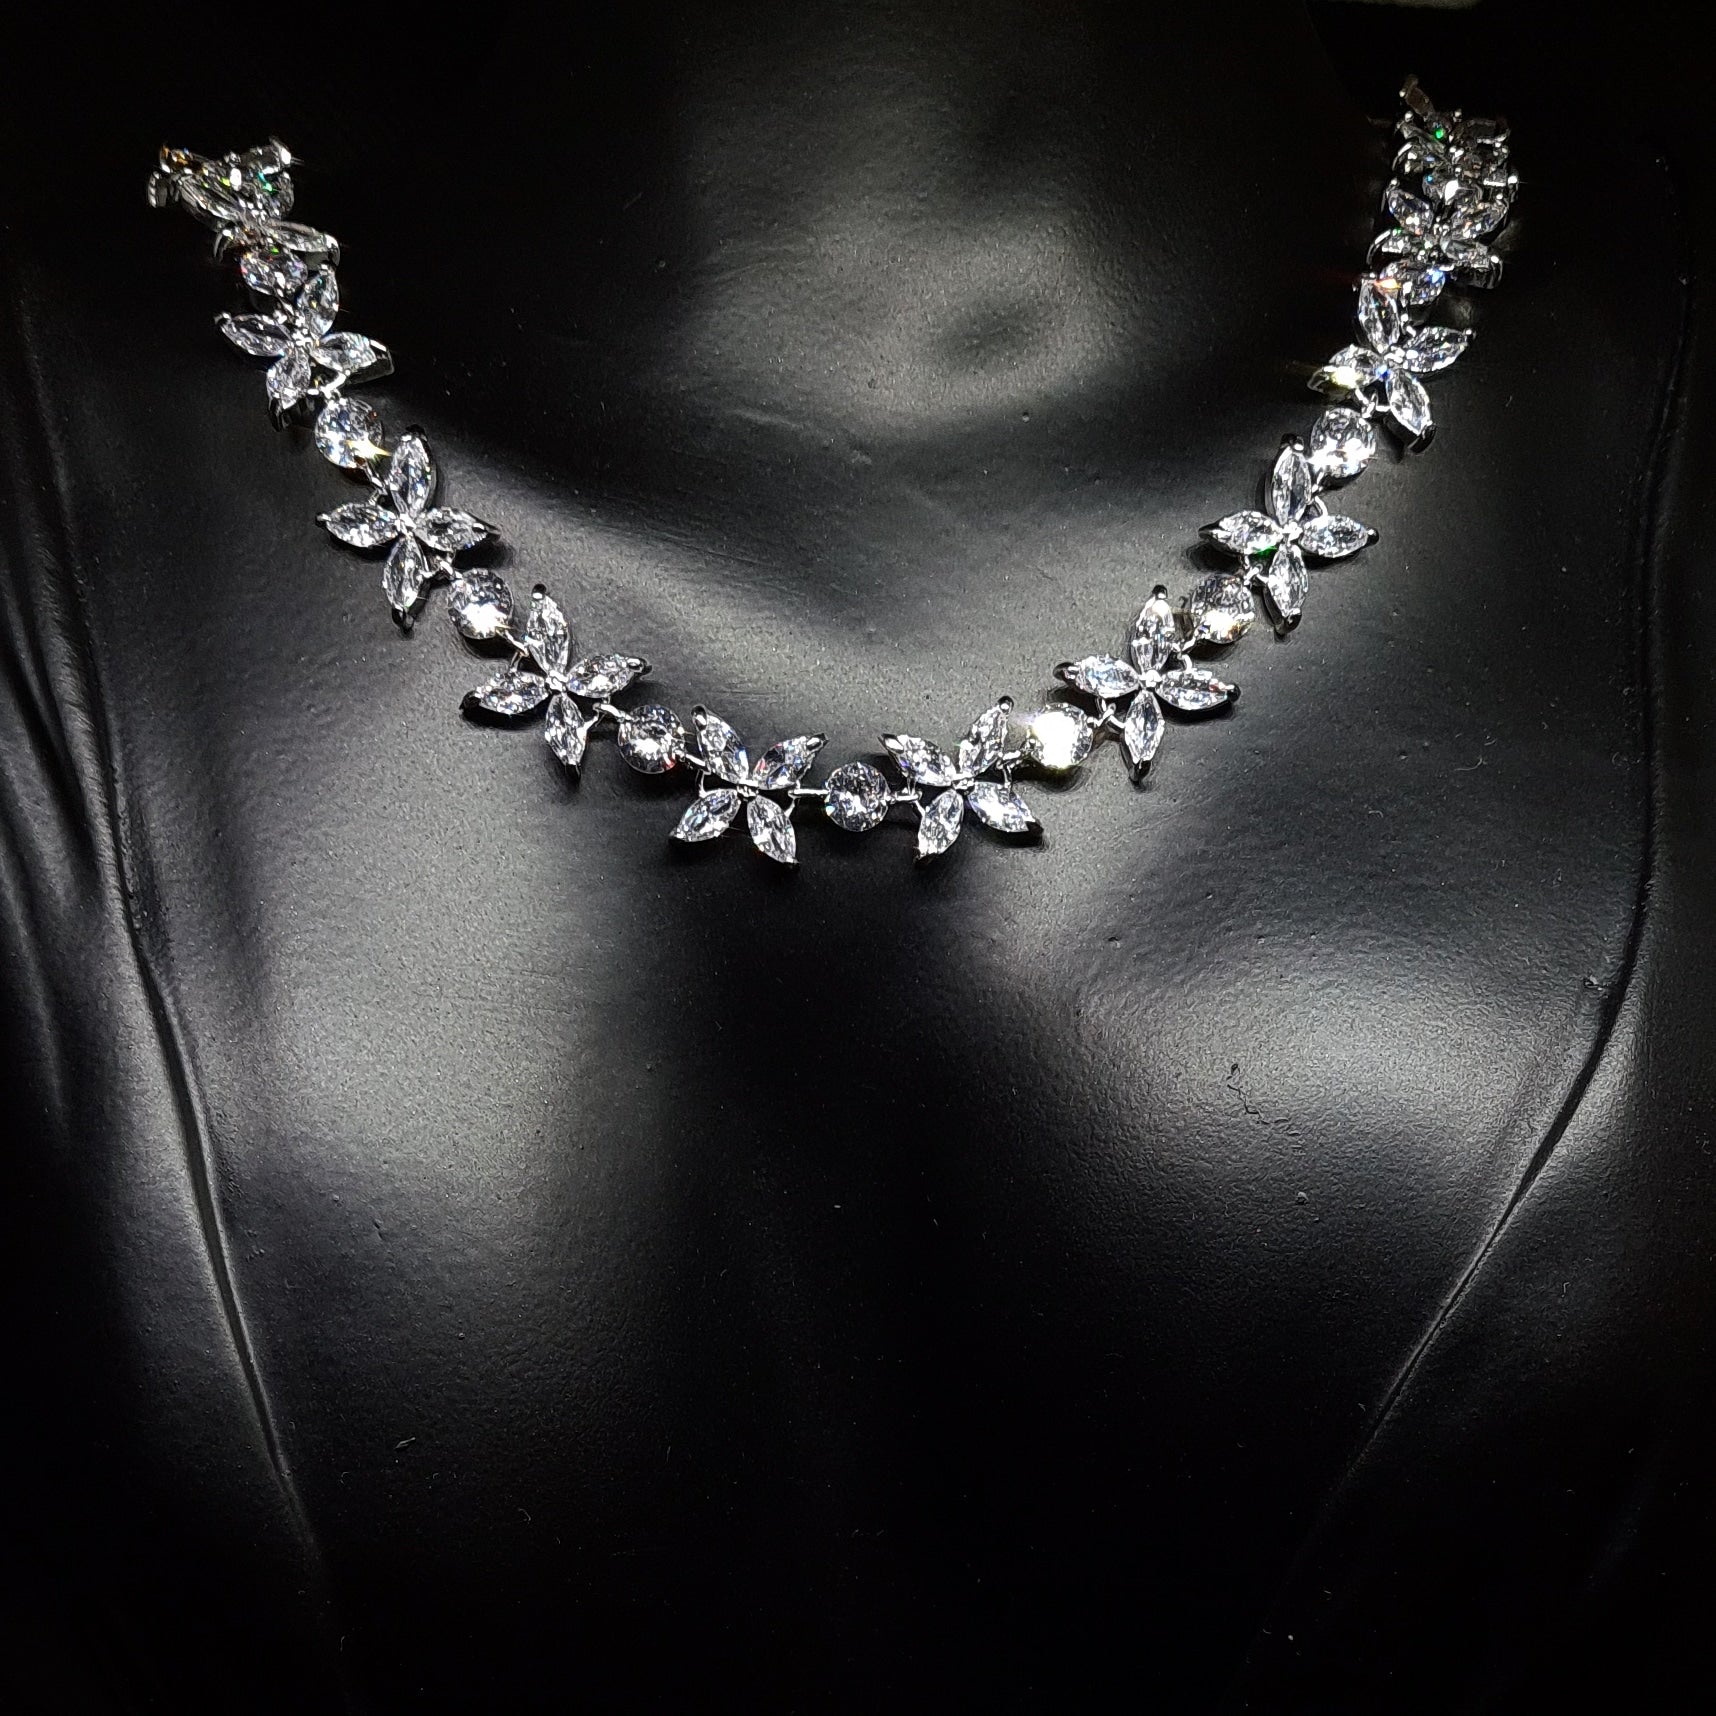 Close-up of a necklace on a mannequin. The necklace is made up of multiple strands of cubic zirconia, with a large pendant in the center. The pendant is flower-shaped and has a sparkling cubic zirconia in the center. The necklace is resting on the mannequin's neck, 